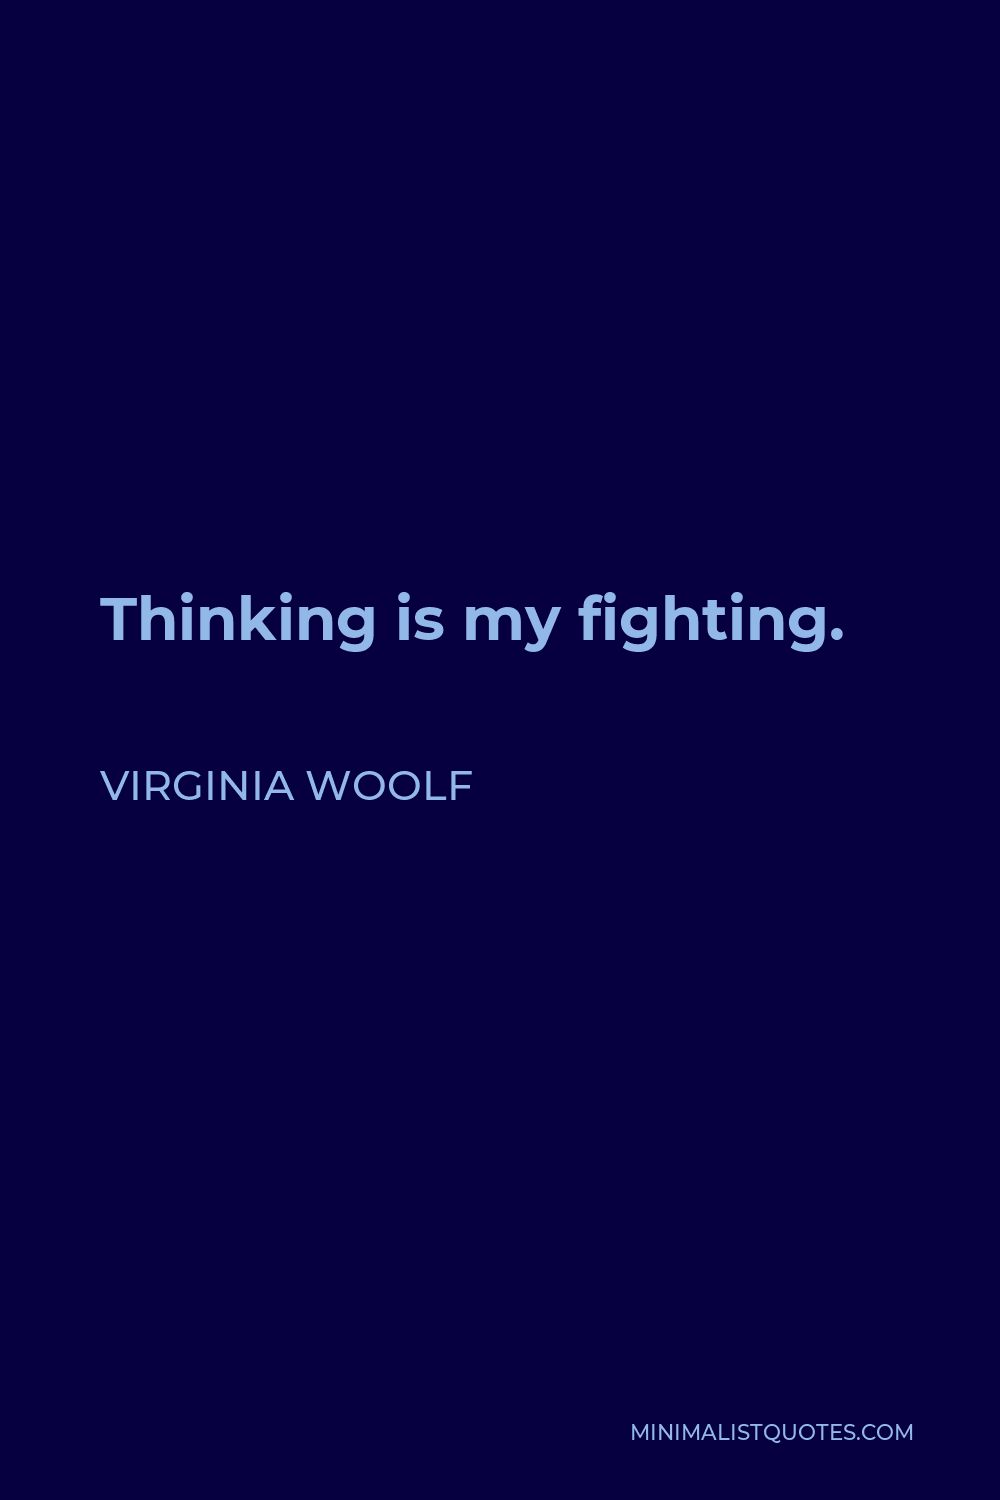 Virginia Woolf Quote - Thinking is my fighting.